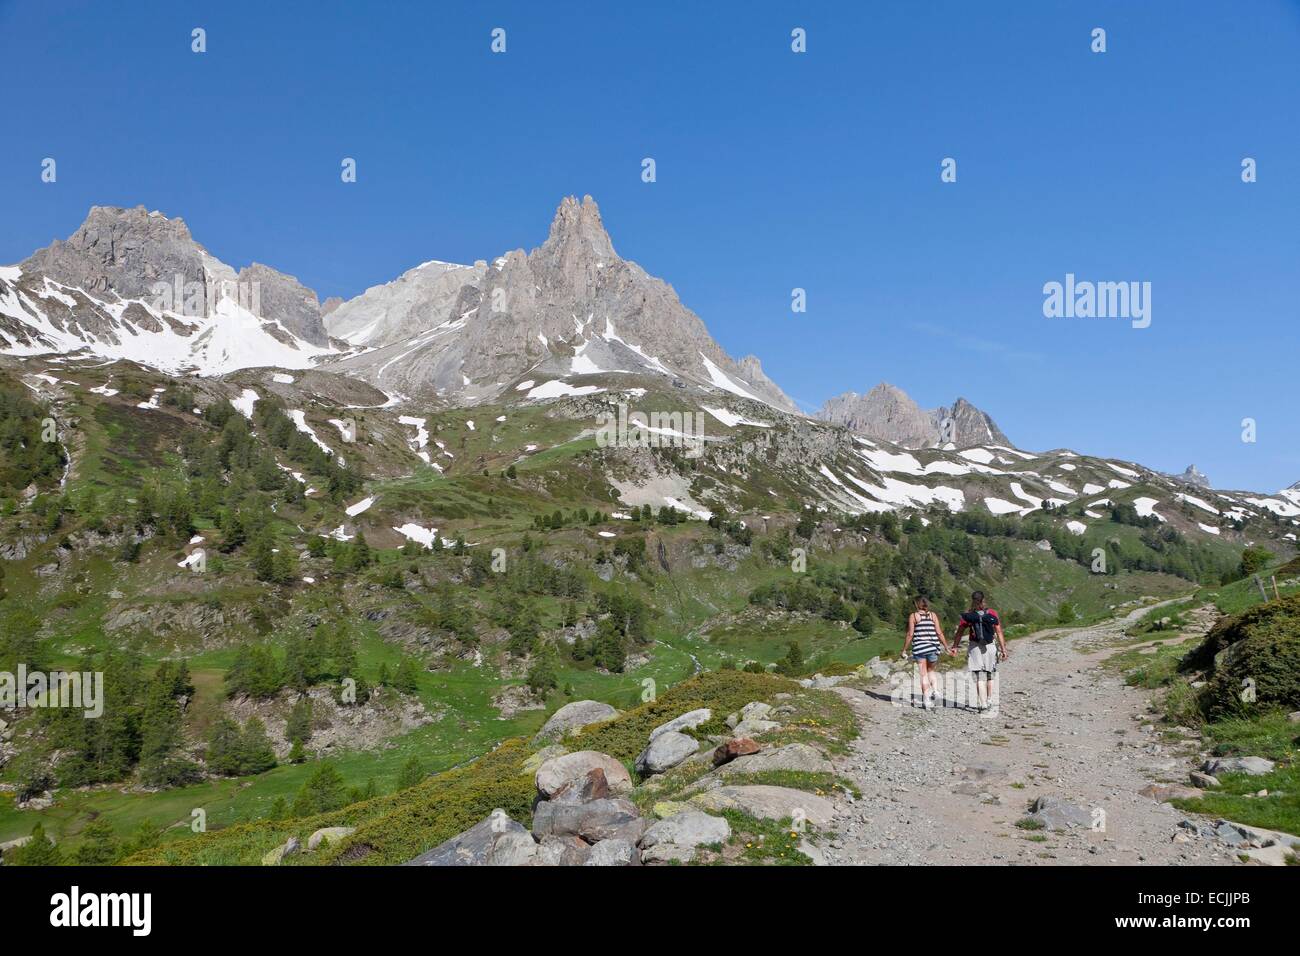 France, Hautes-Alpes, Nevache La Claree valley, overlooking the Pointe Cerces (3097m), hikers Stock Photo